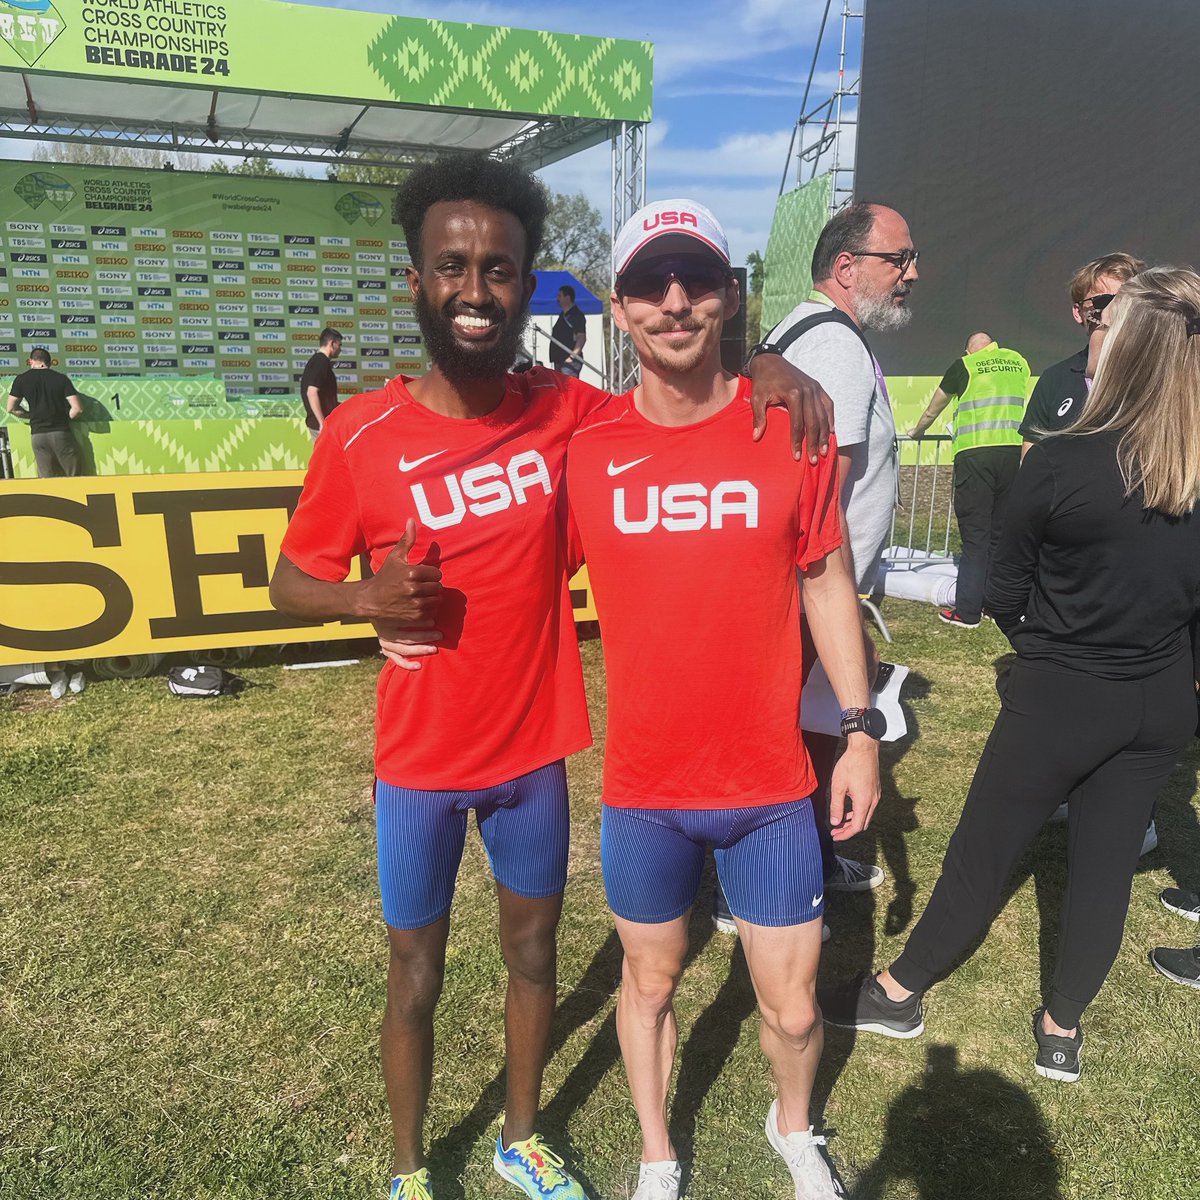 🇺🇸 𝐔𝐒𝐀 ‼️ Good luck to our #Noles Ahmed Muhumed & Kasey Knevelbaard who will be competing for @usatf in the @worldathletics XC Championships on Saturday!